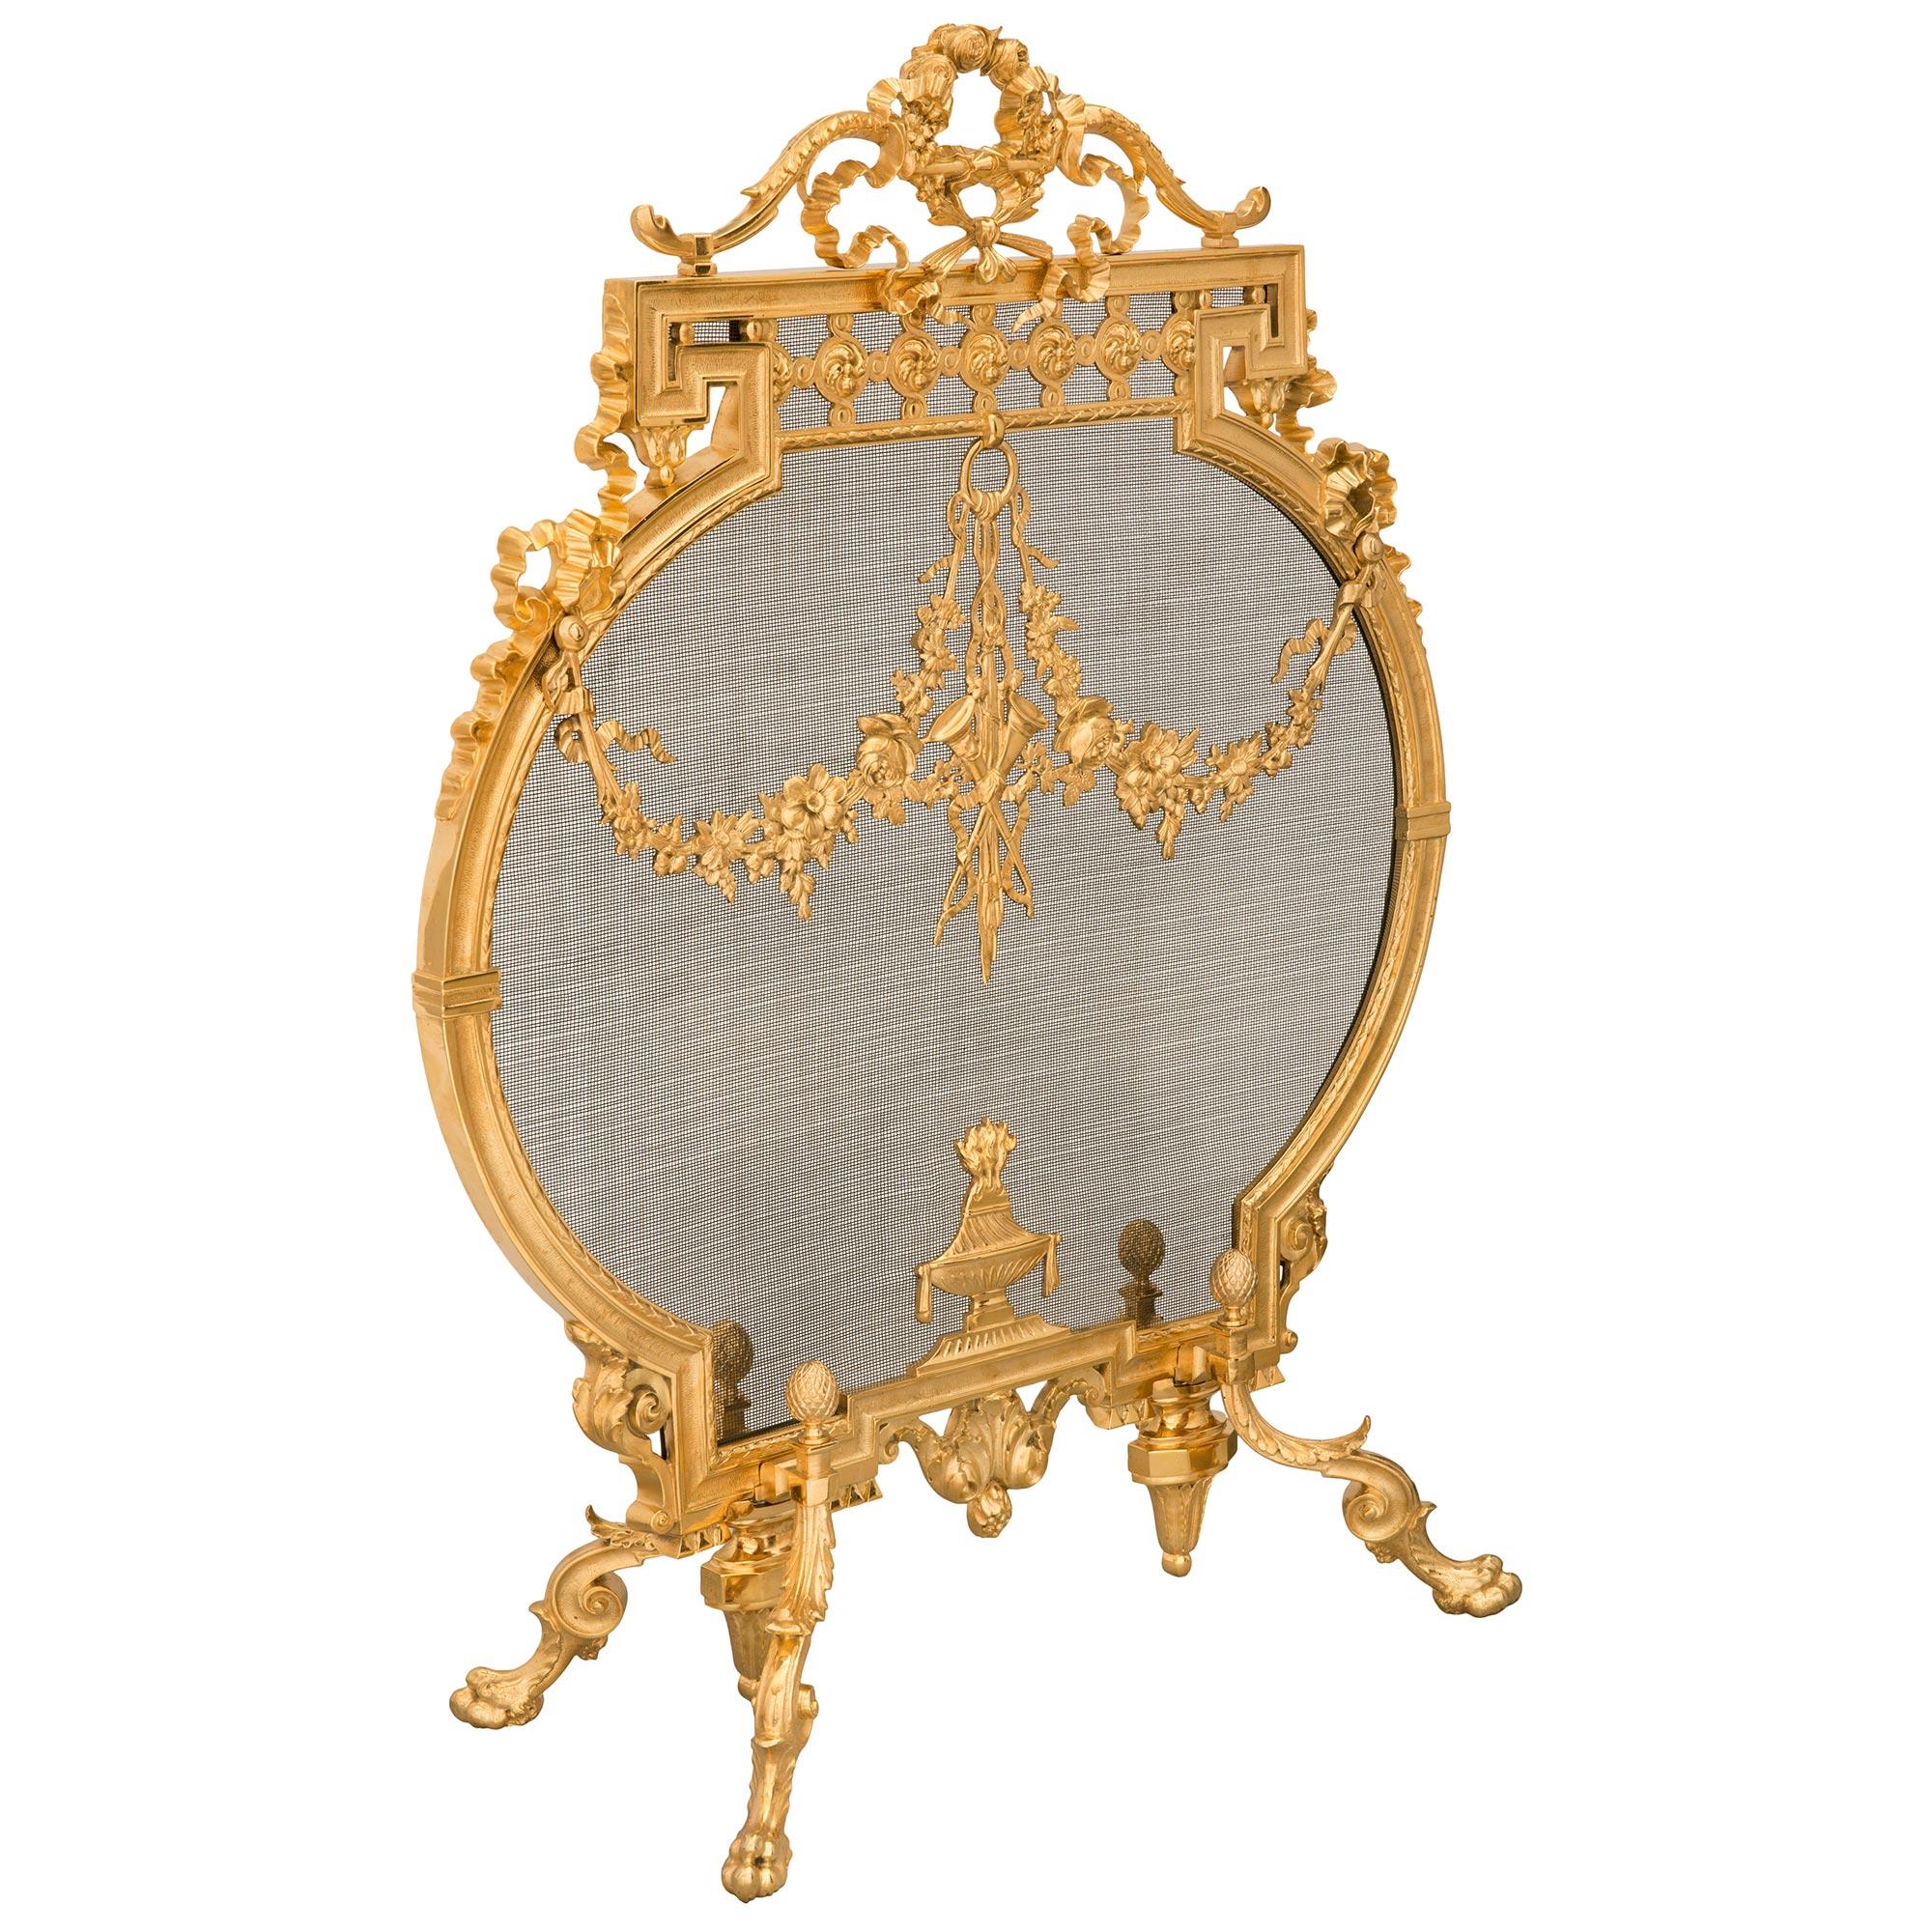 A striking and very high quality French 19th century Neo-Classical st. Belle Époque period ormolu fire screen. The screen is raised by elegant scrolled legs with handsome paw feet and adorned with charming acanthus leaves leading to fine acorn